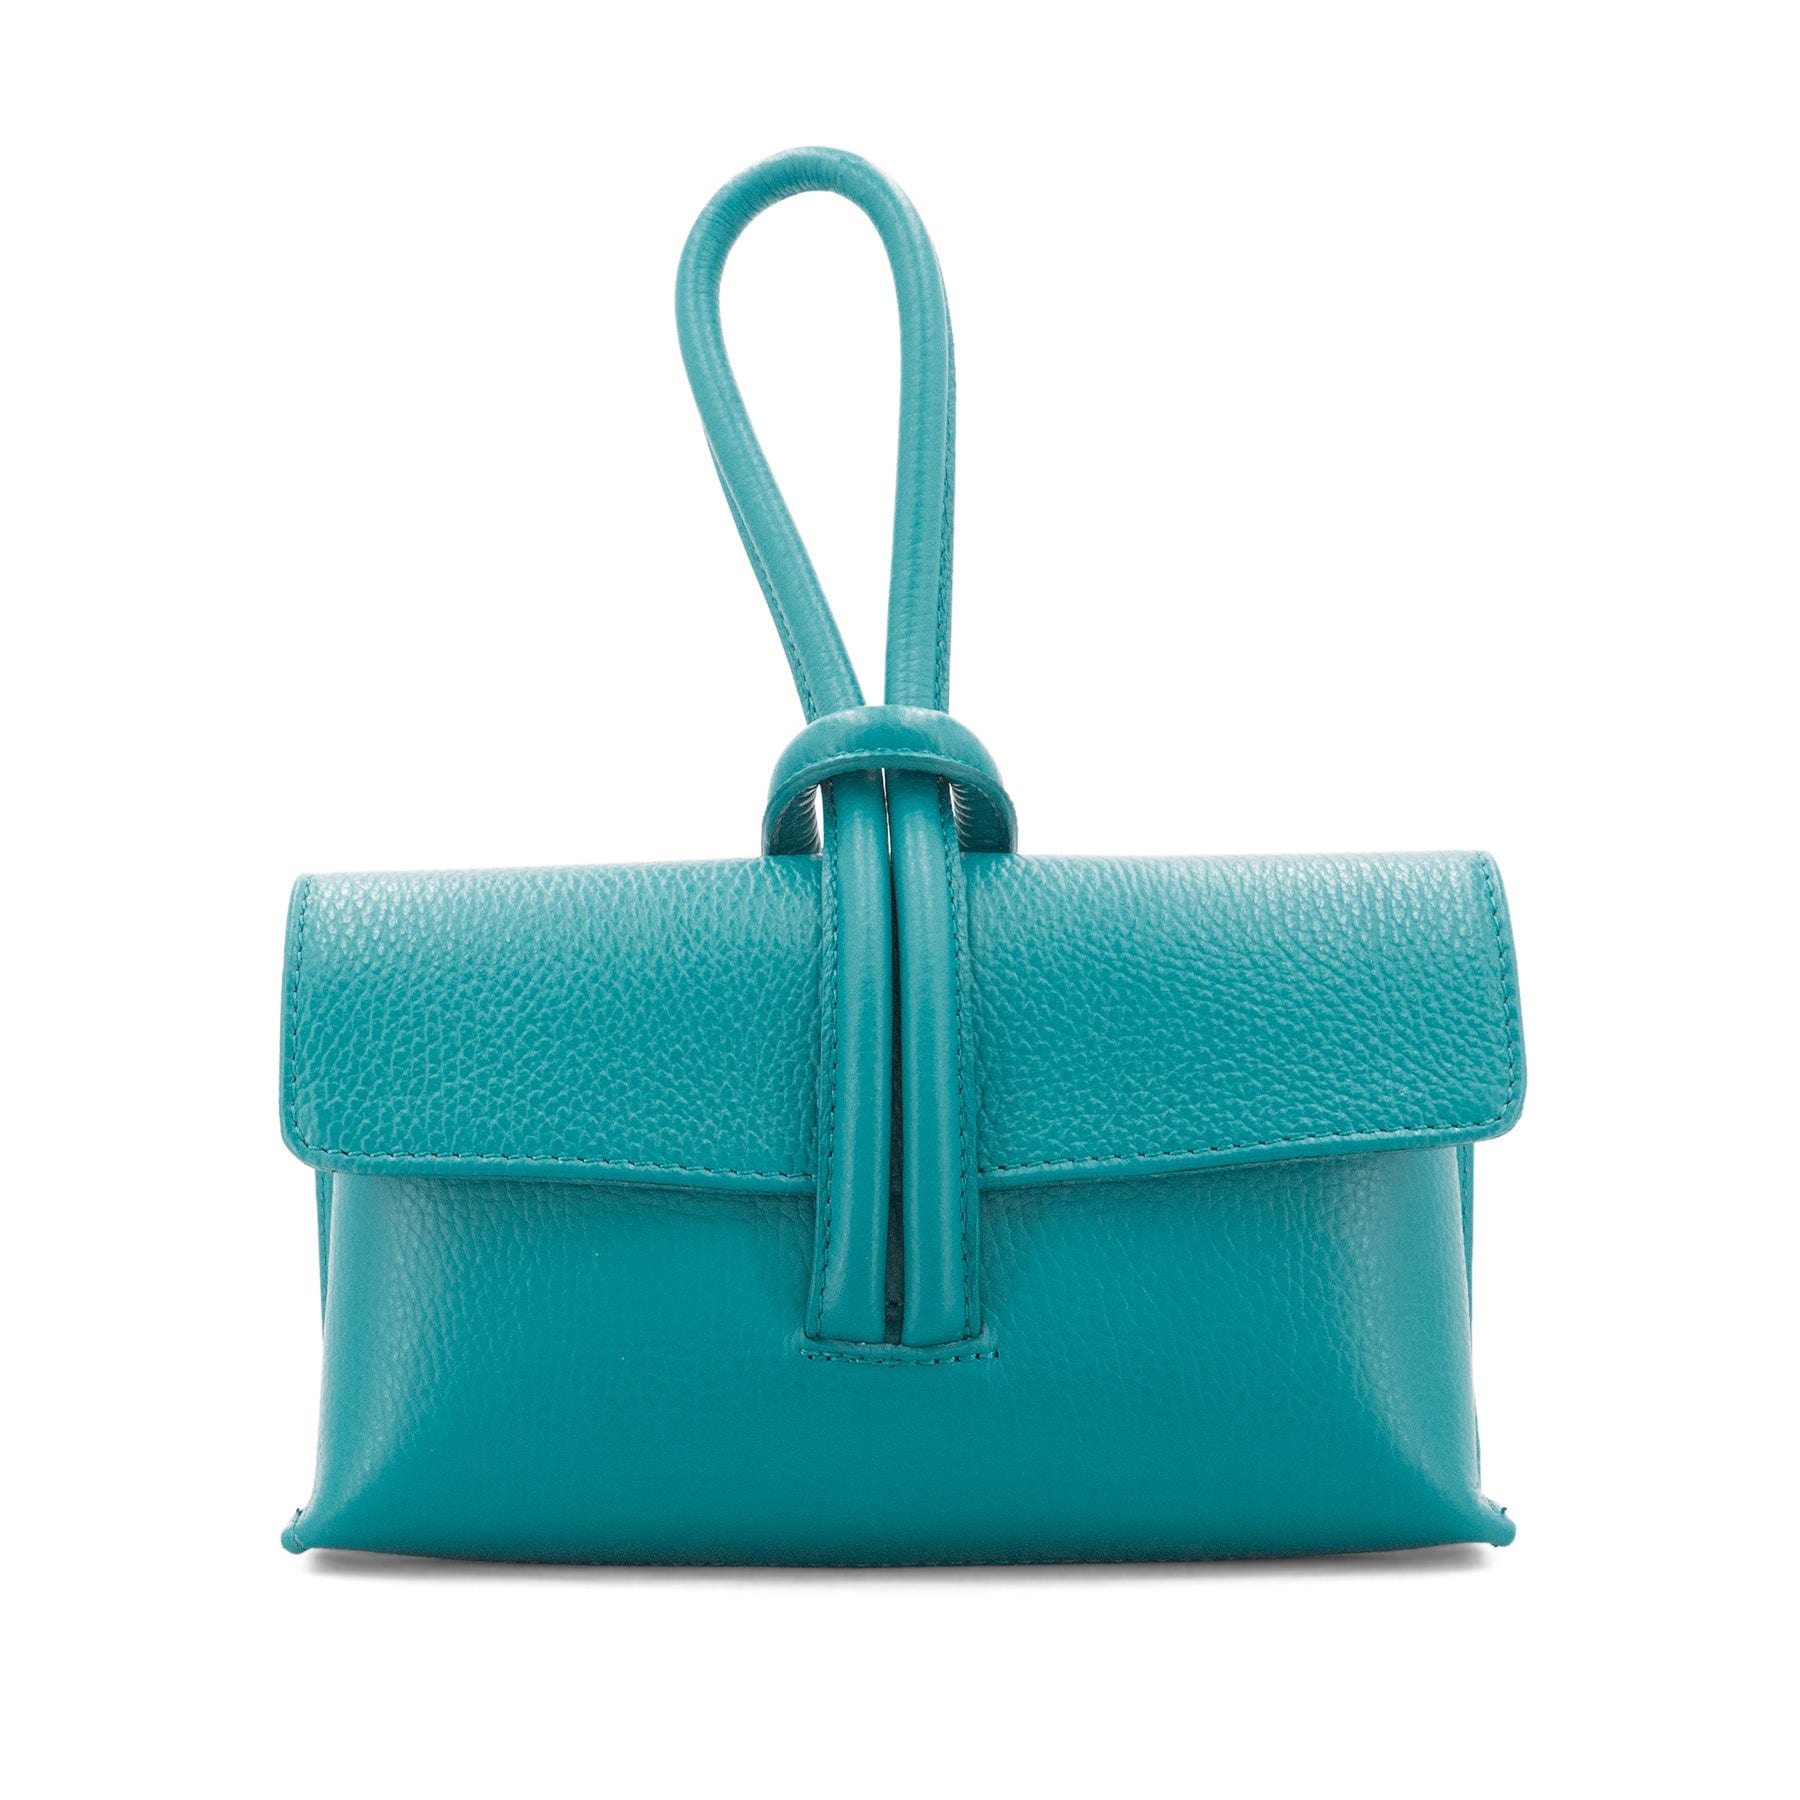 lusciousscarves Turquoise Italian Leather Clutch Bag, Evening Bag with Loop Handle